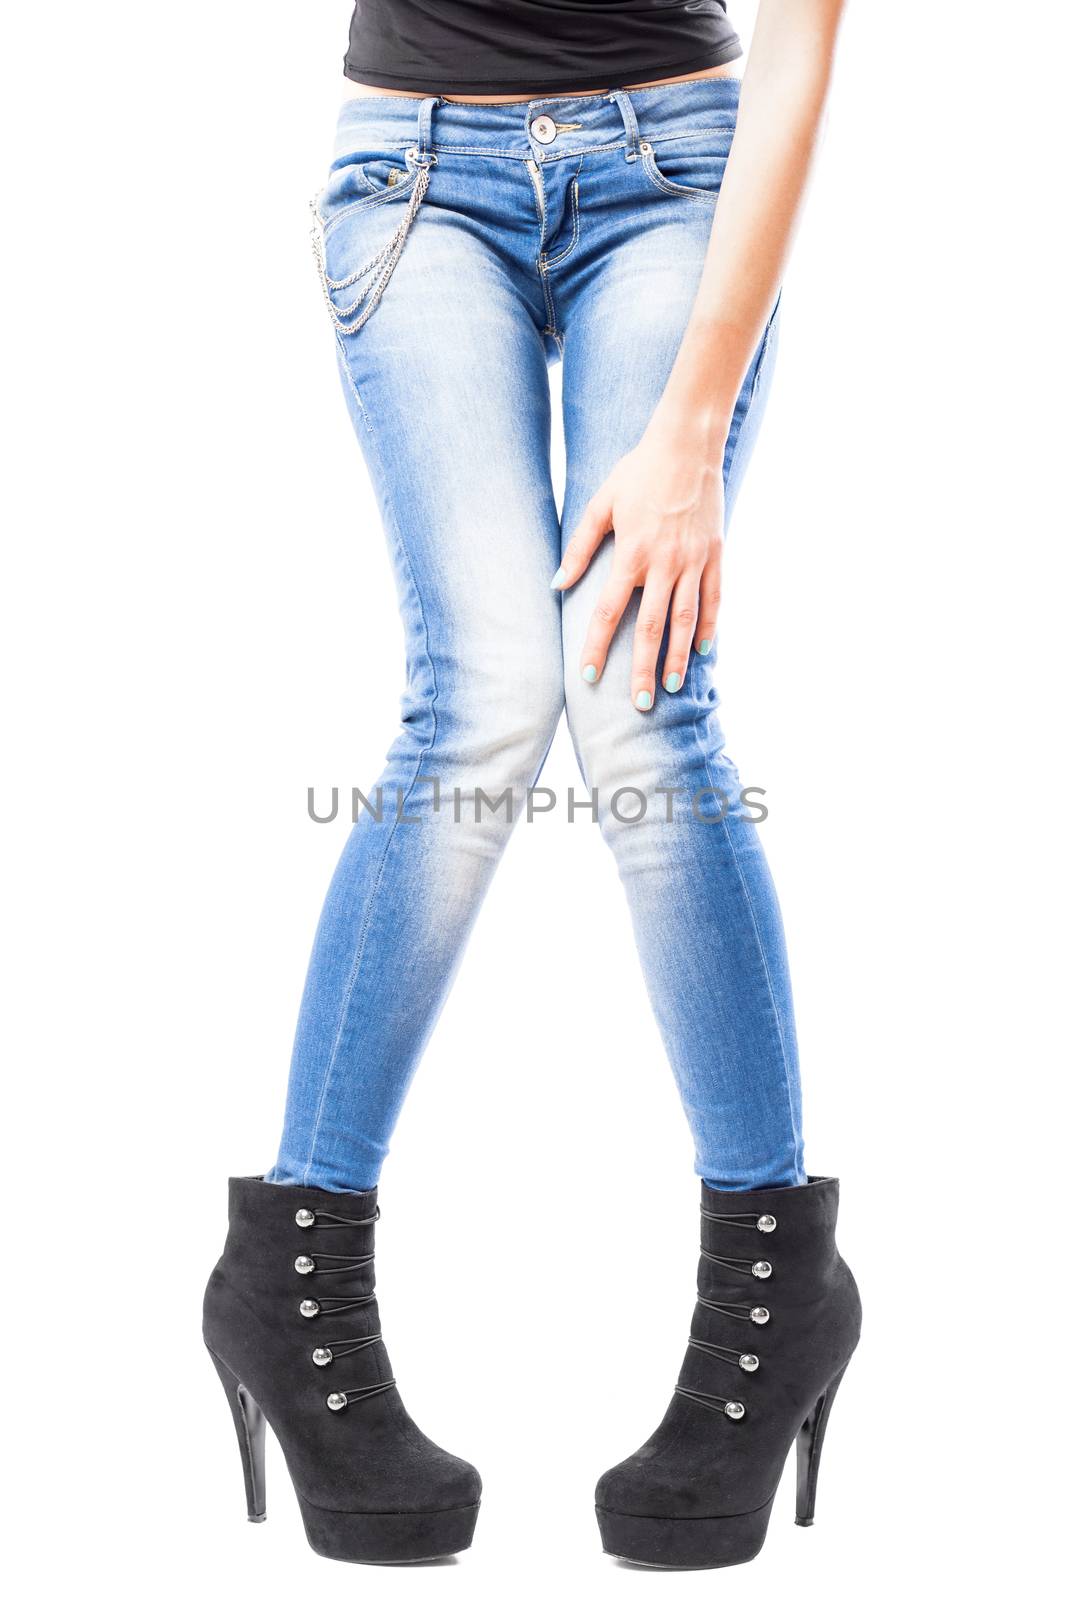 girl touching her leg in blue jeans and black high heels